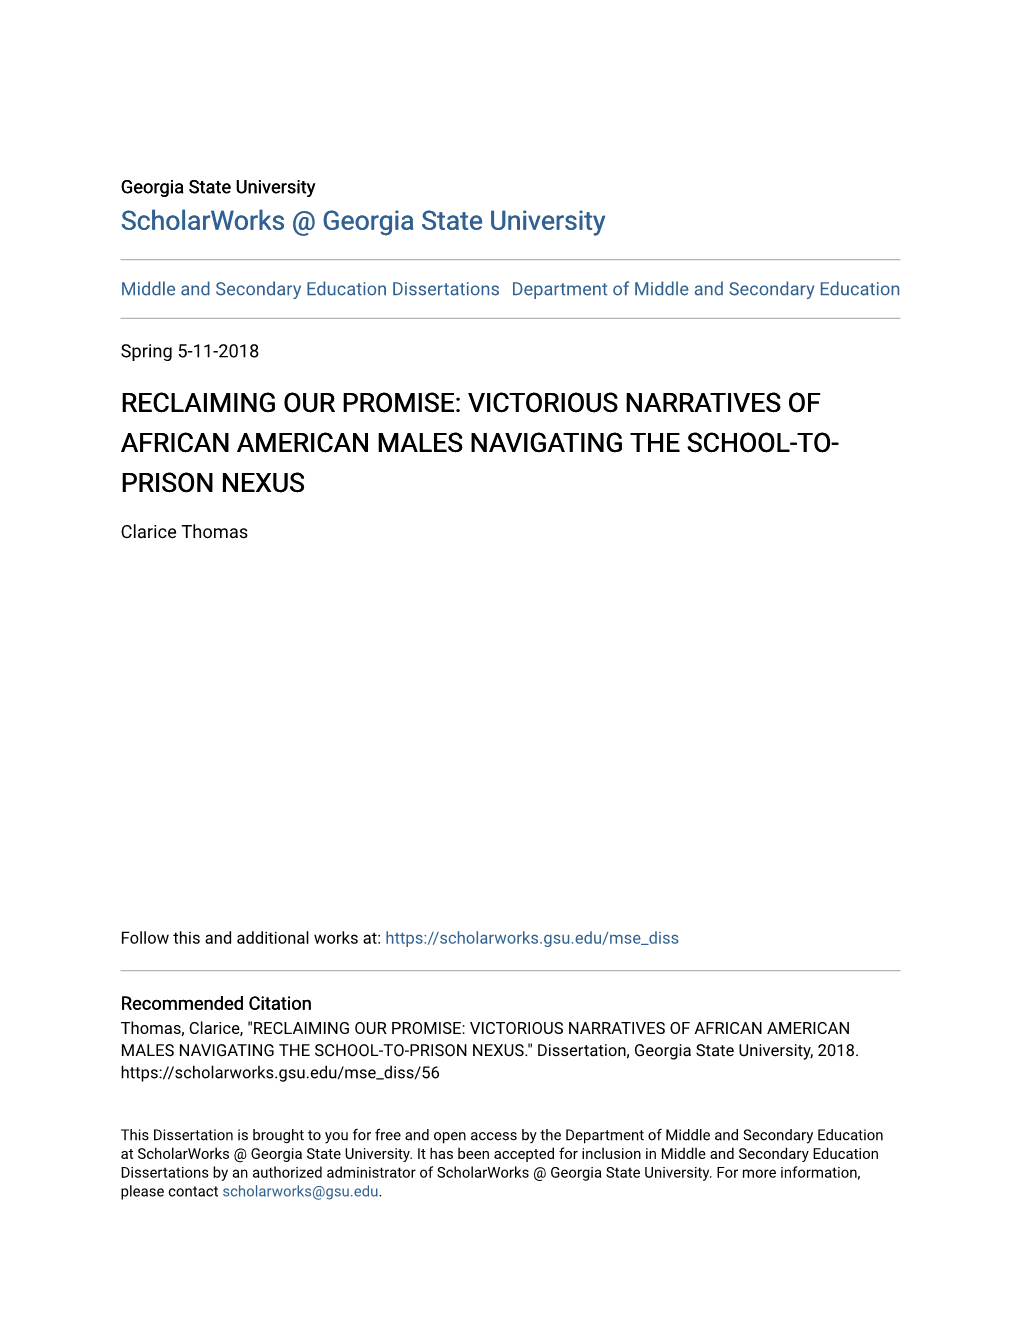 Reclaiming Our Promise: Victorious Narratives of African American Males Navigating the School-To- Prison Nexus